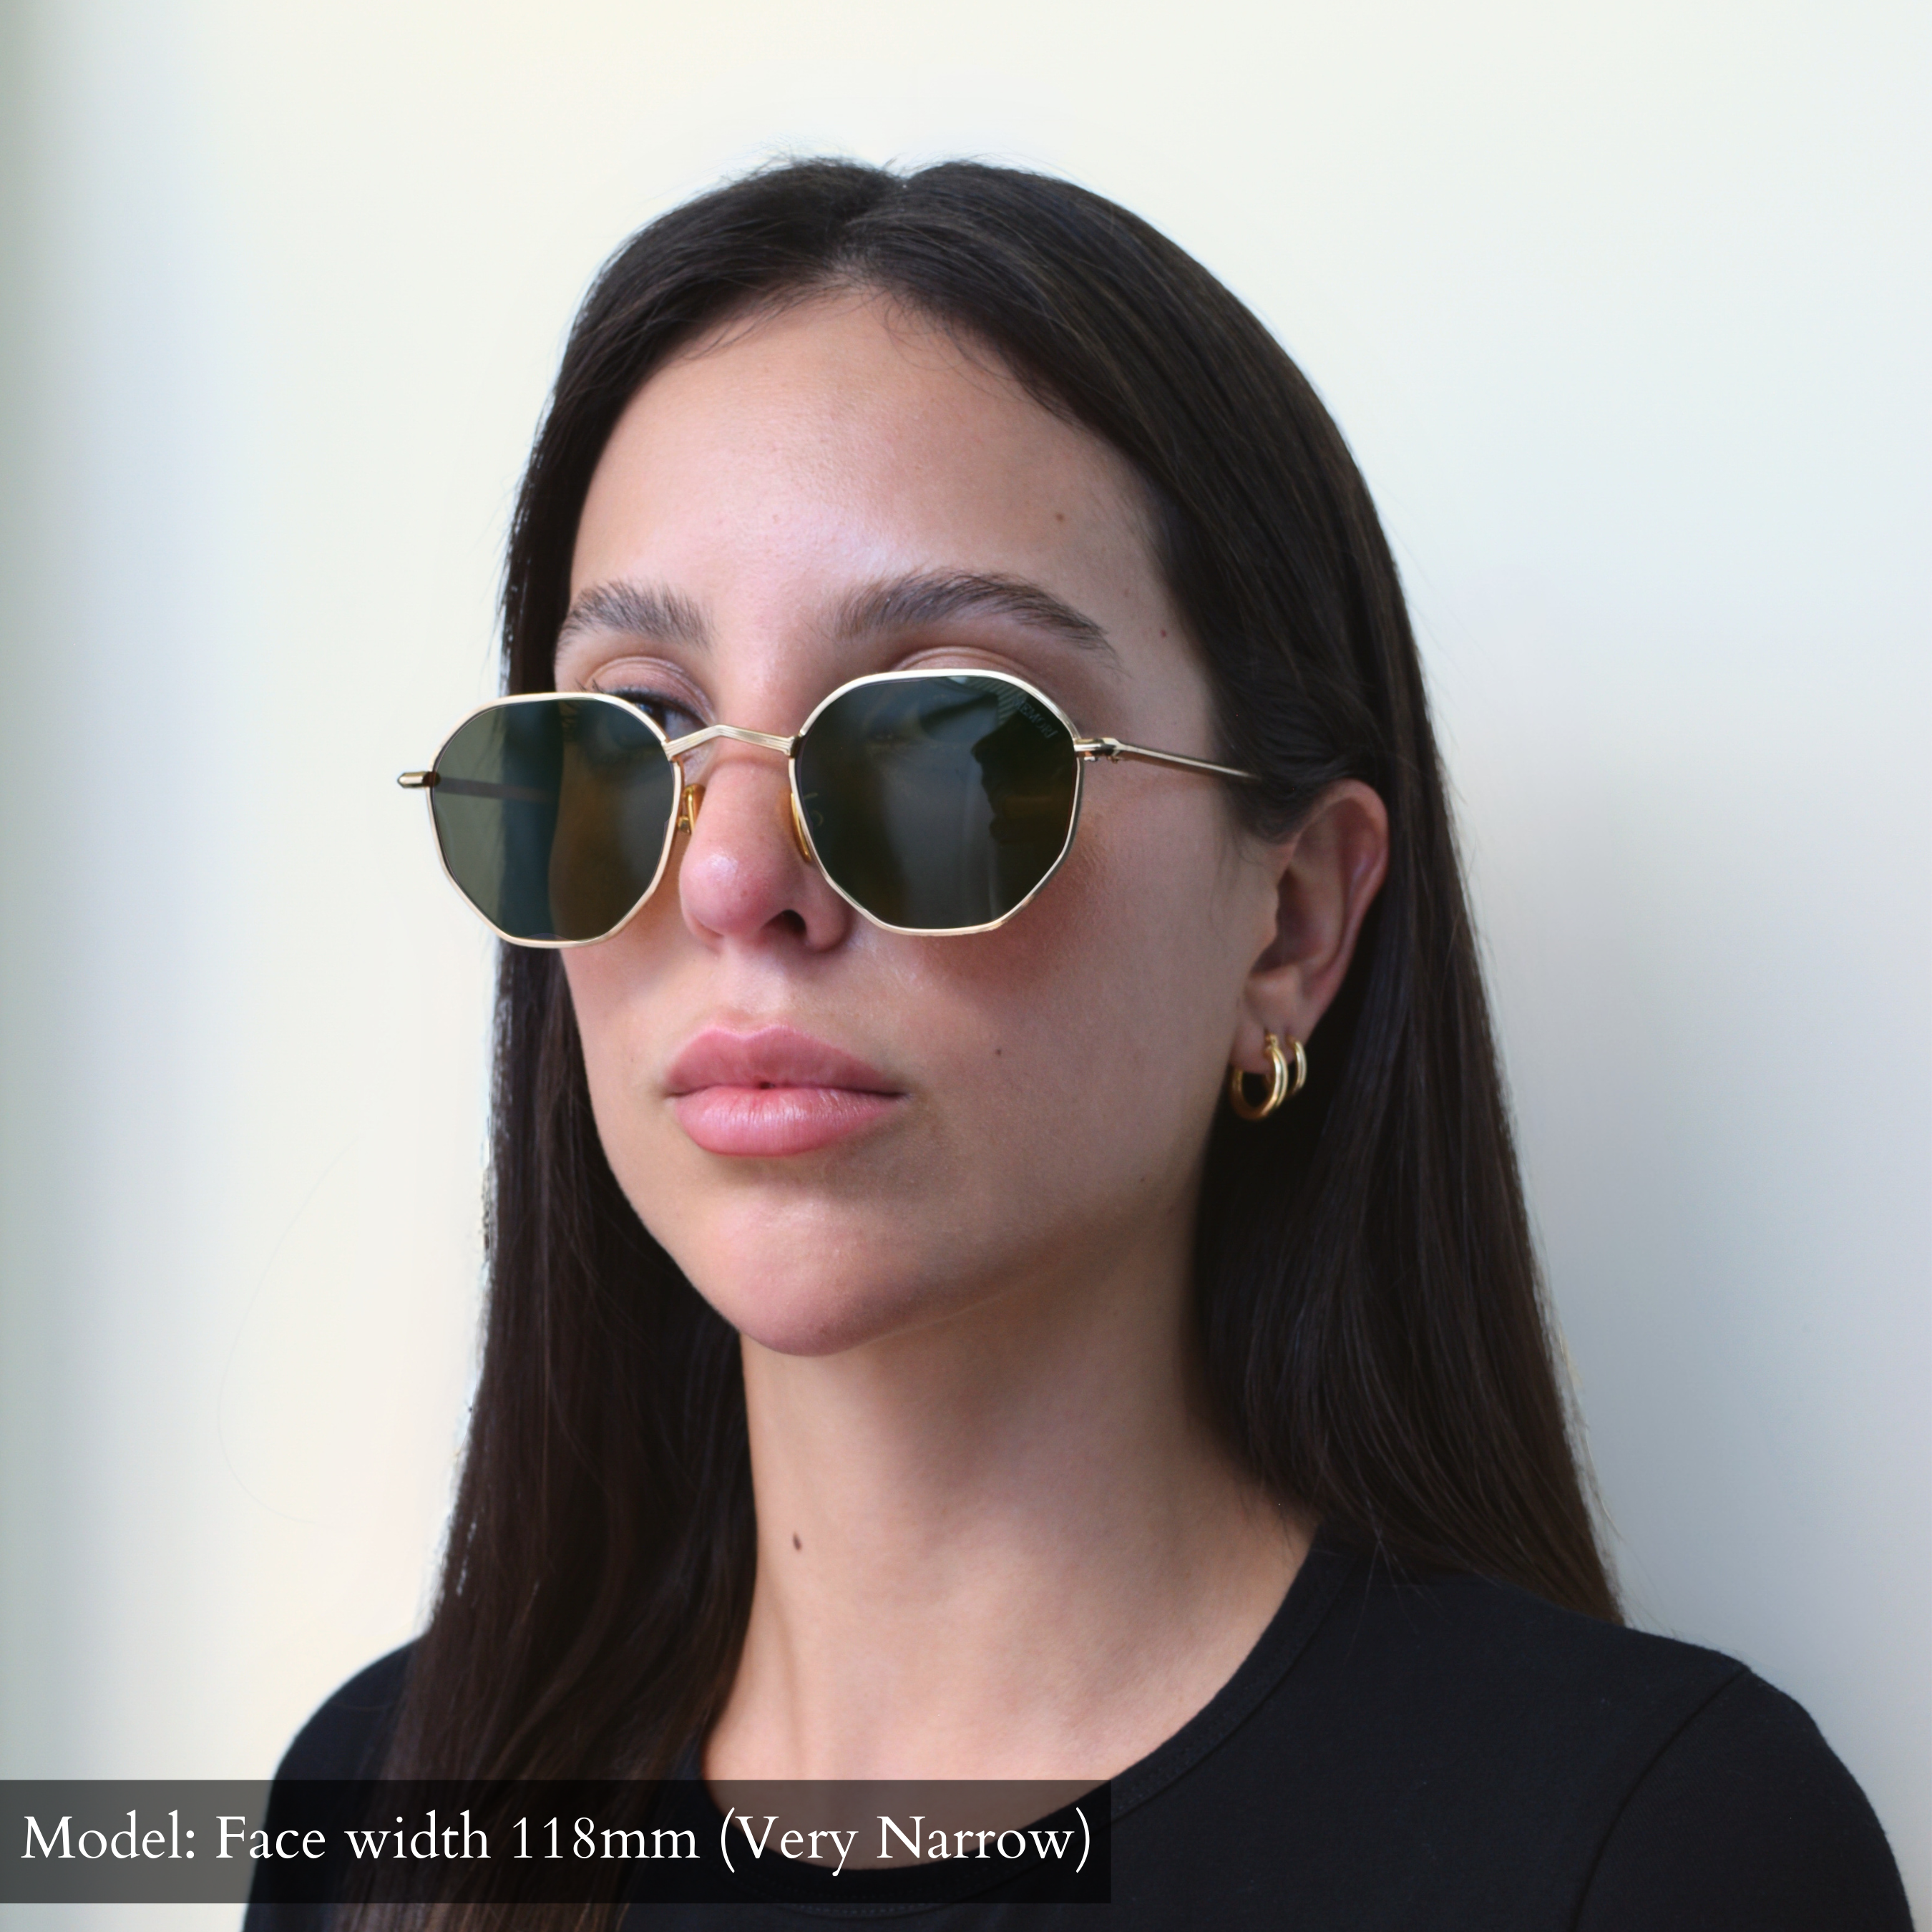 Gold Memorí hexagon metal sunglasses with V shaped nose bridge, gold nose pads, and geometric pressed metal eye rim detailing. Photo shows sunglasses on model. Model has a very narrow face, and these frames fit her well. Sunglasses are designed to fit smaller faces.